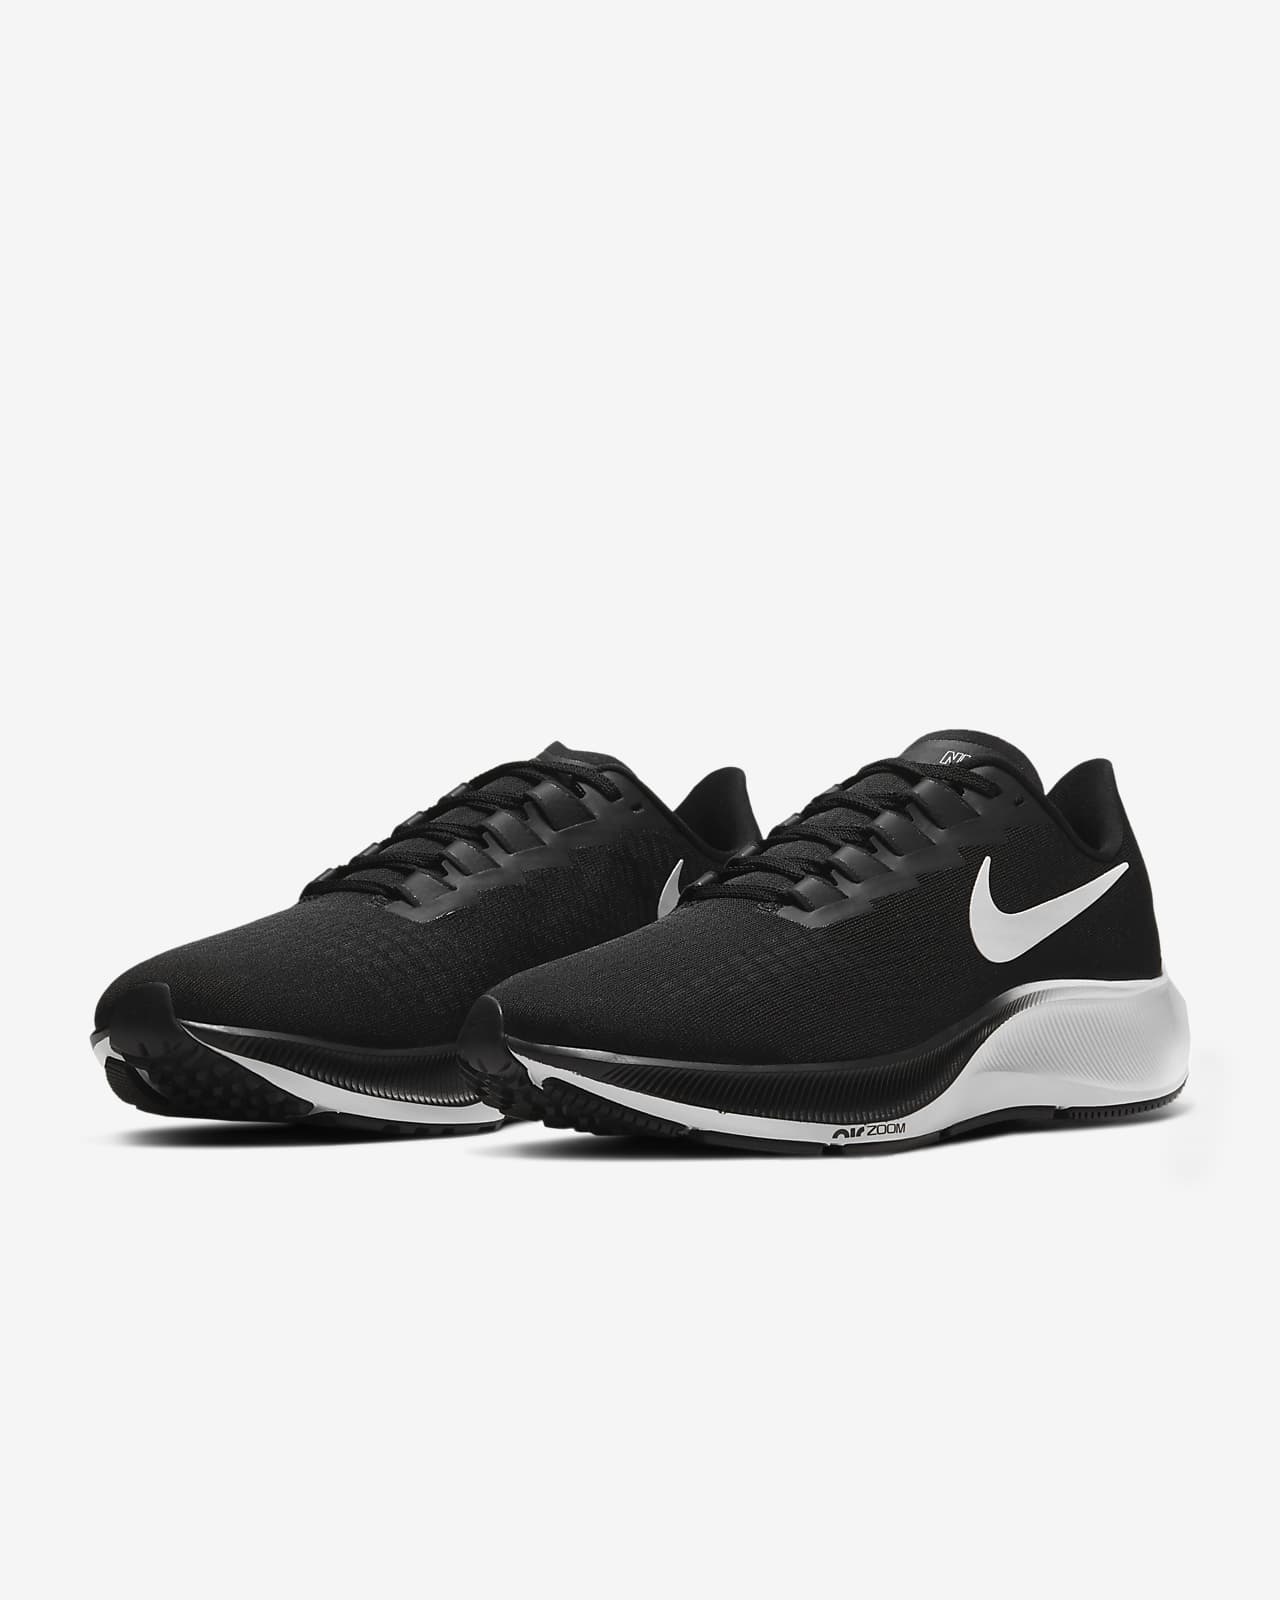 nike running air zoom pegasus trainers in black and white